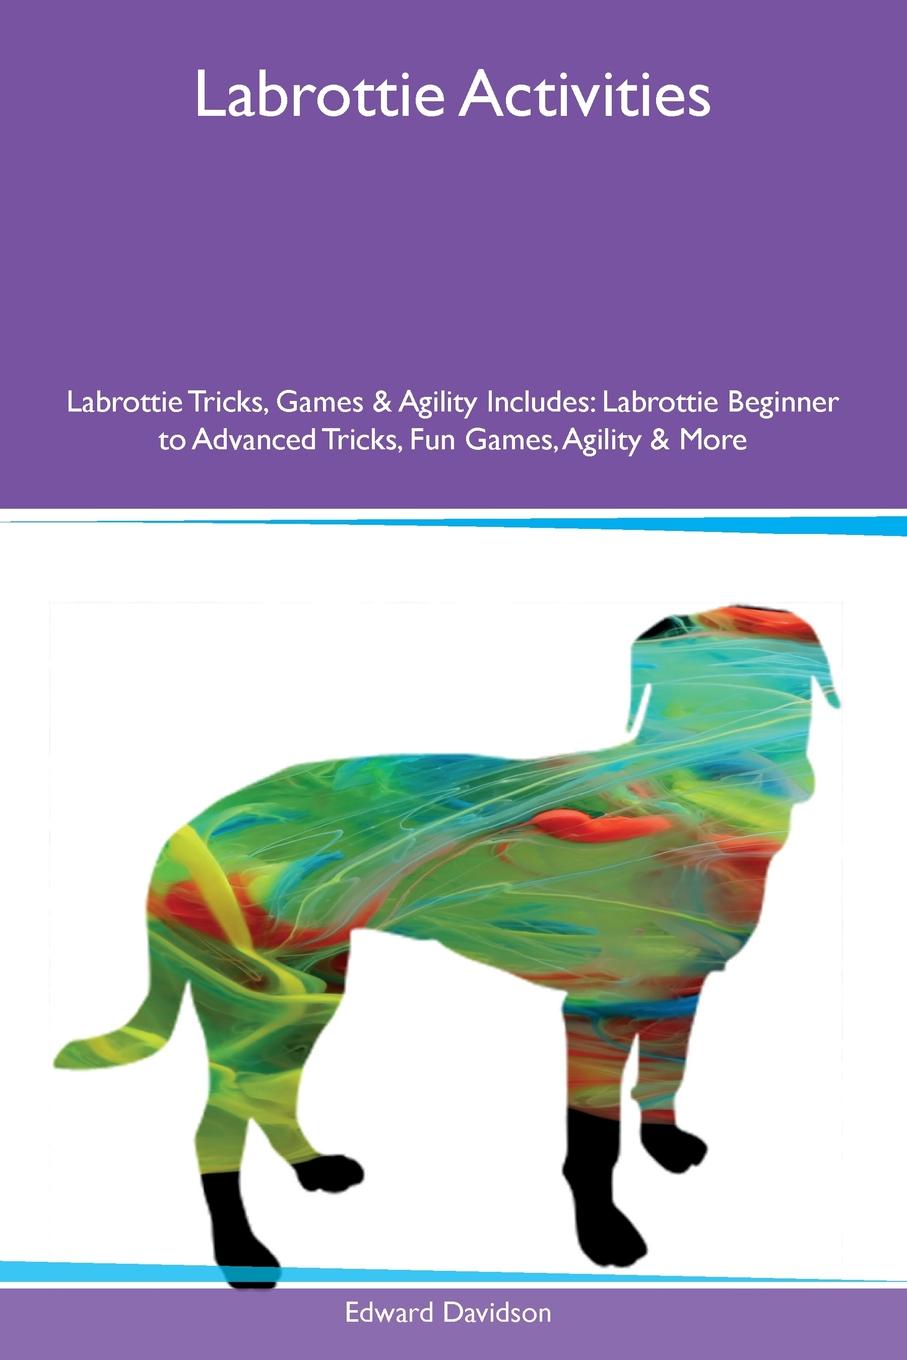 Labrottie Activities Labrottie Tricks, Games & Agility Includes. Labrottie Beginner to Advanced Tricks, Fun Games, Agility & More